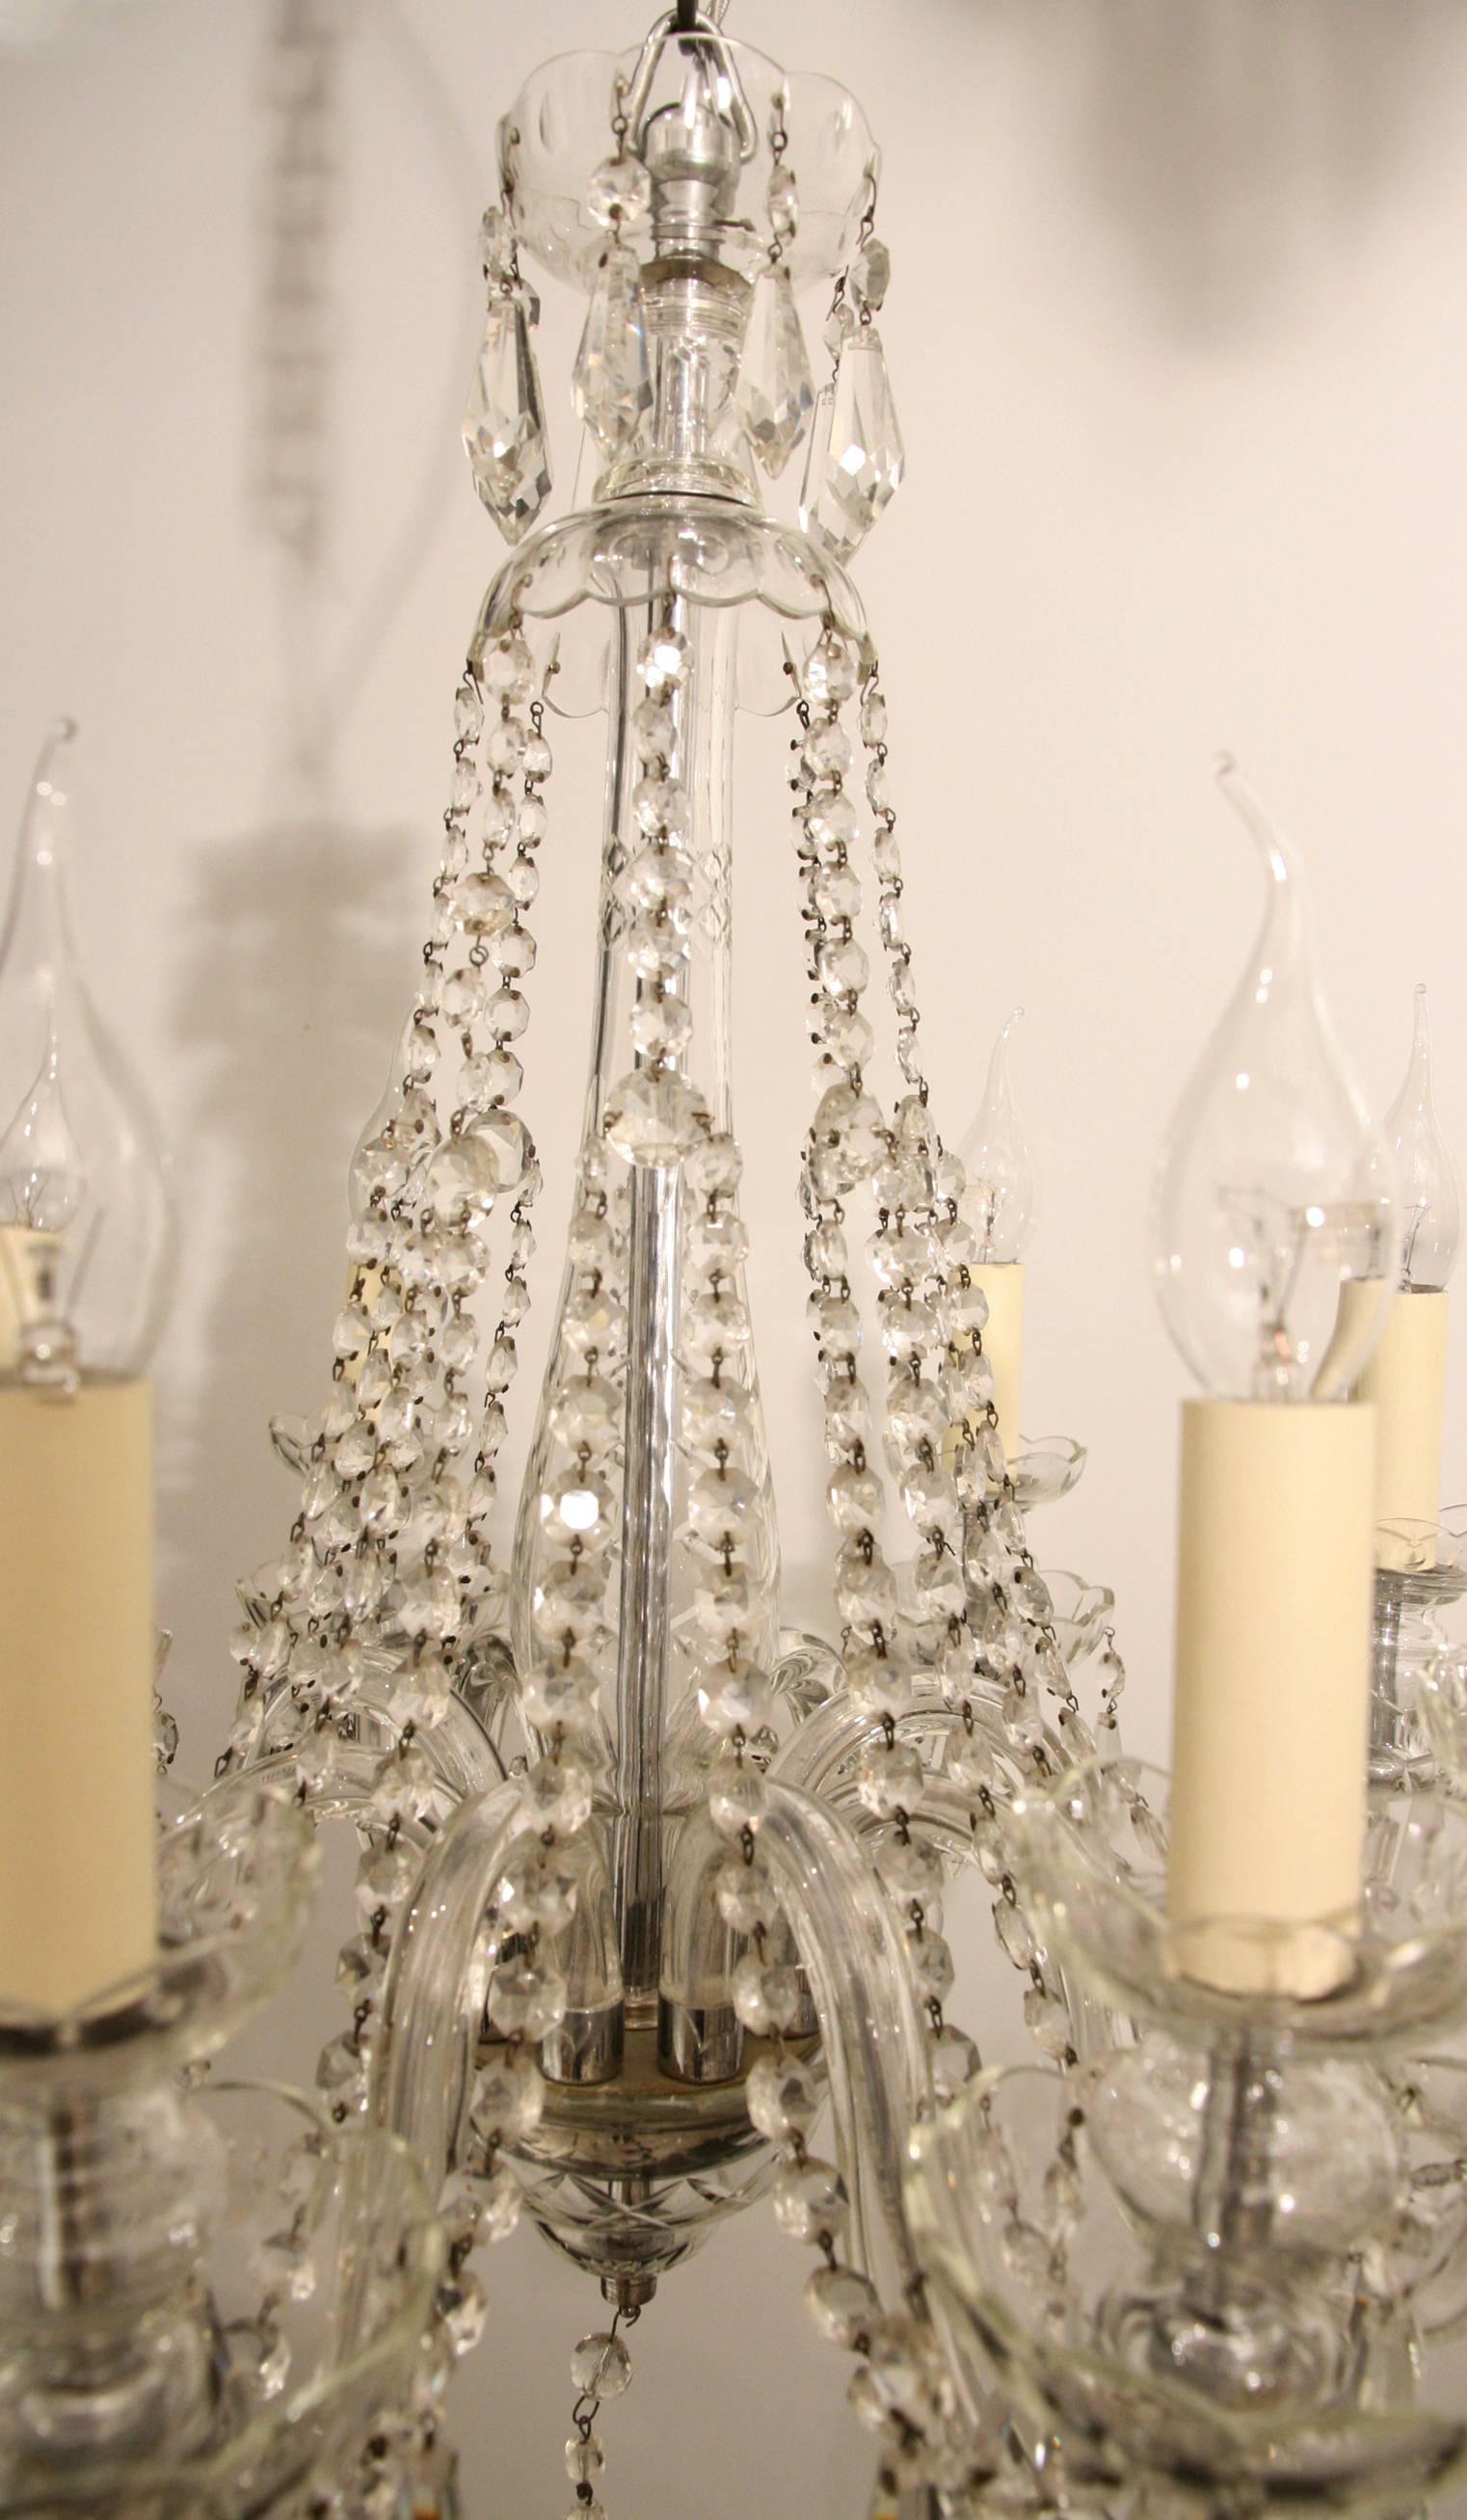 A well-proportioned cut glass, eight-arm chandelier.